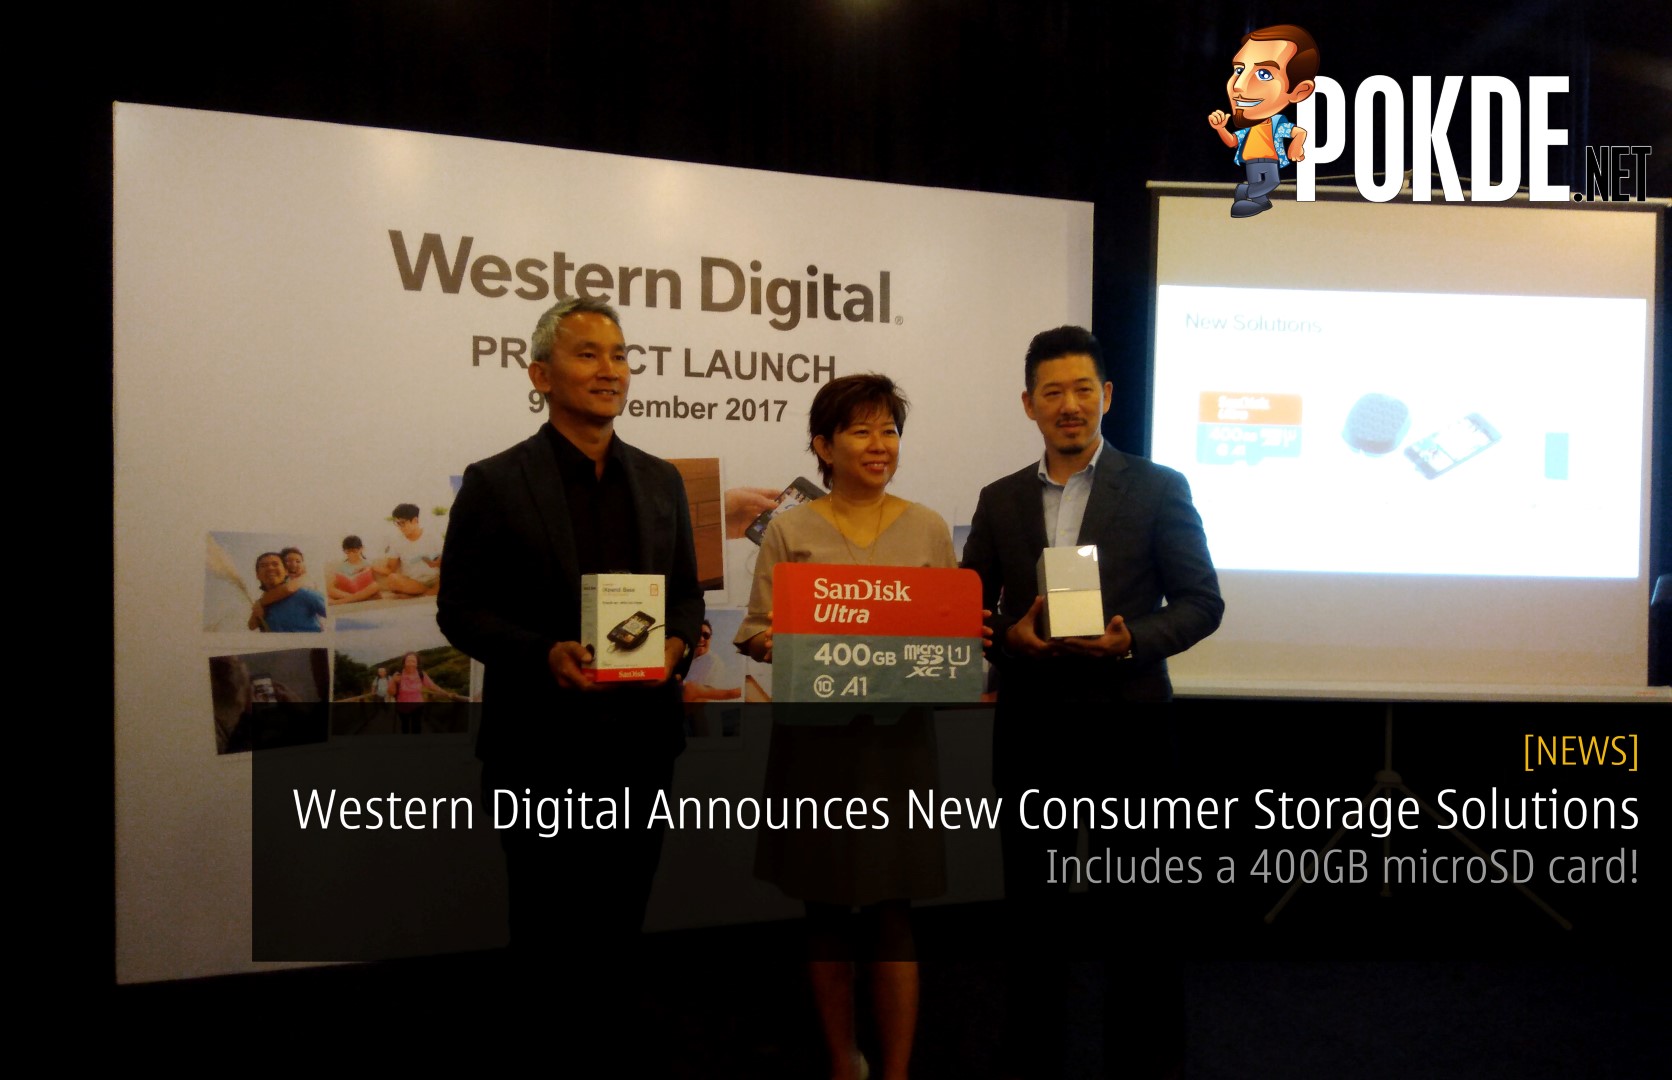 Western Digital Announces New Consumer Storage Solutions - Includes a 400GB microSD card! 34